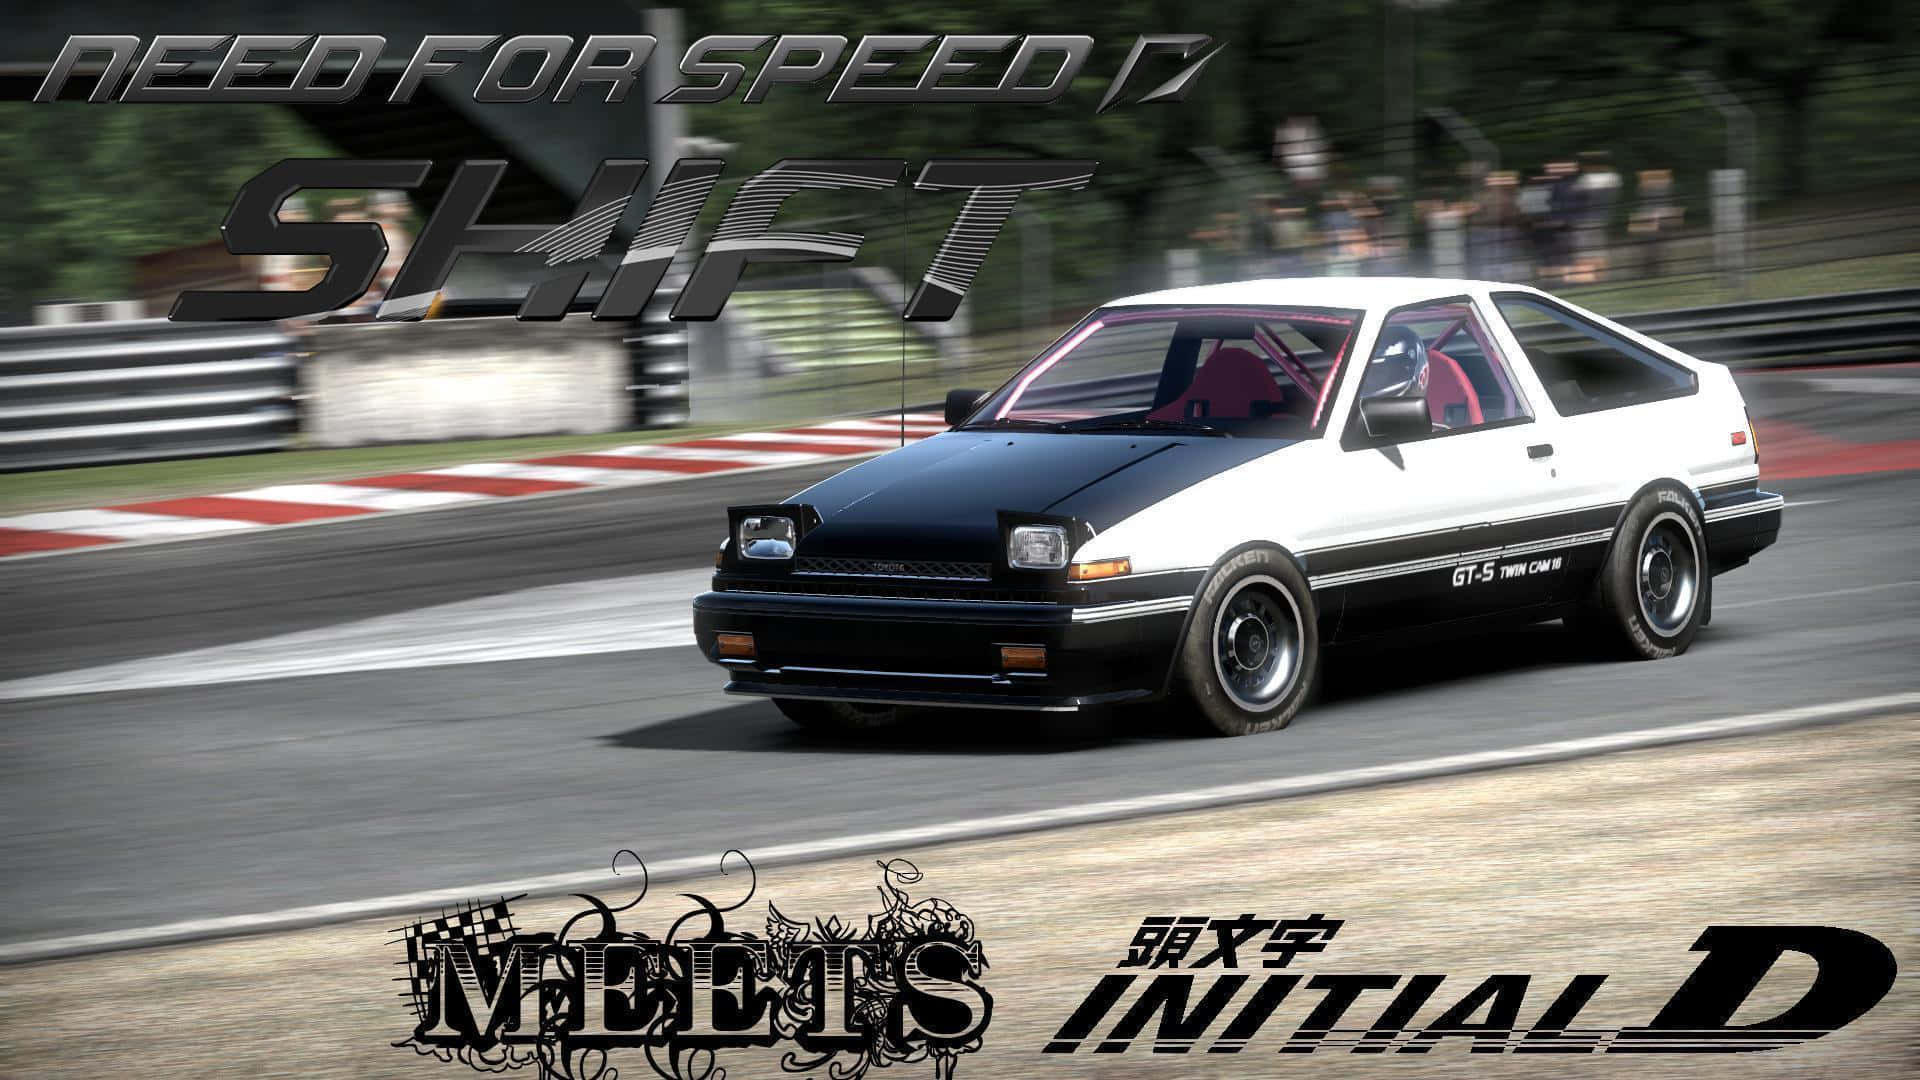 Download Initial D Background Meets Need For Speed | Wallpapers.com